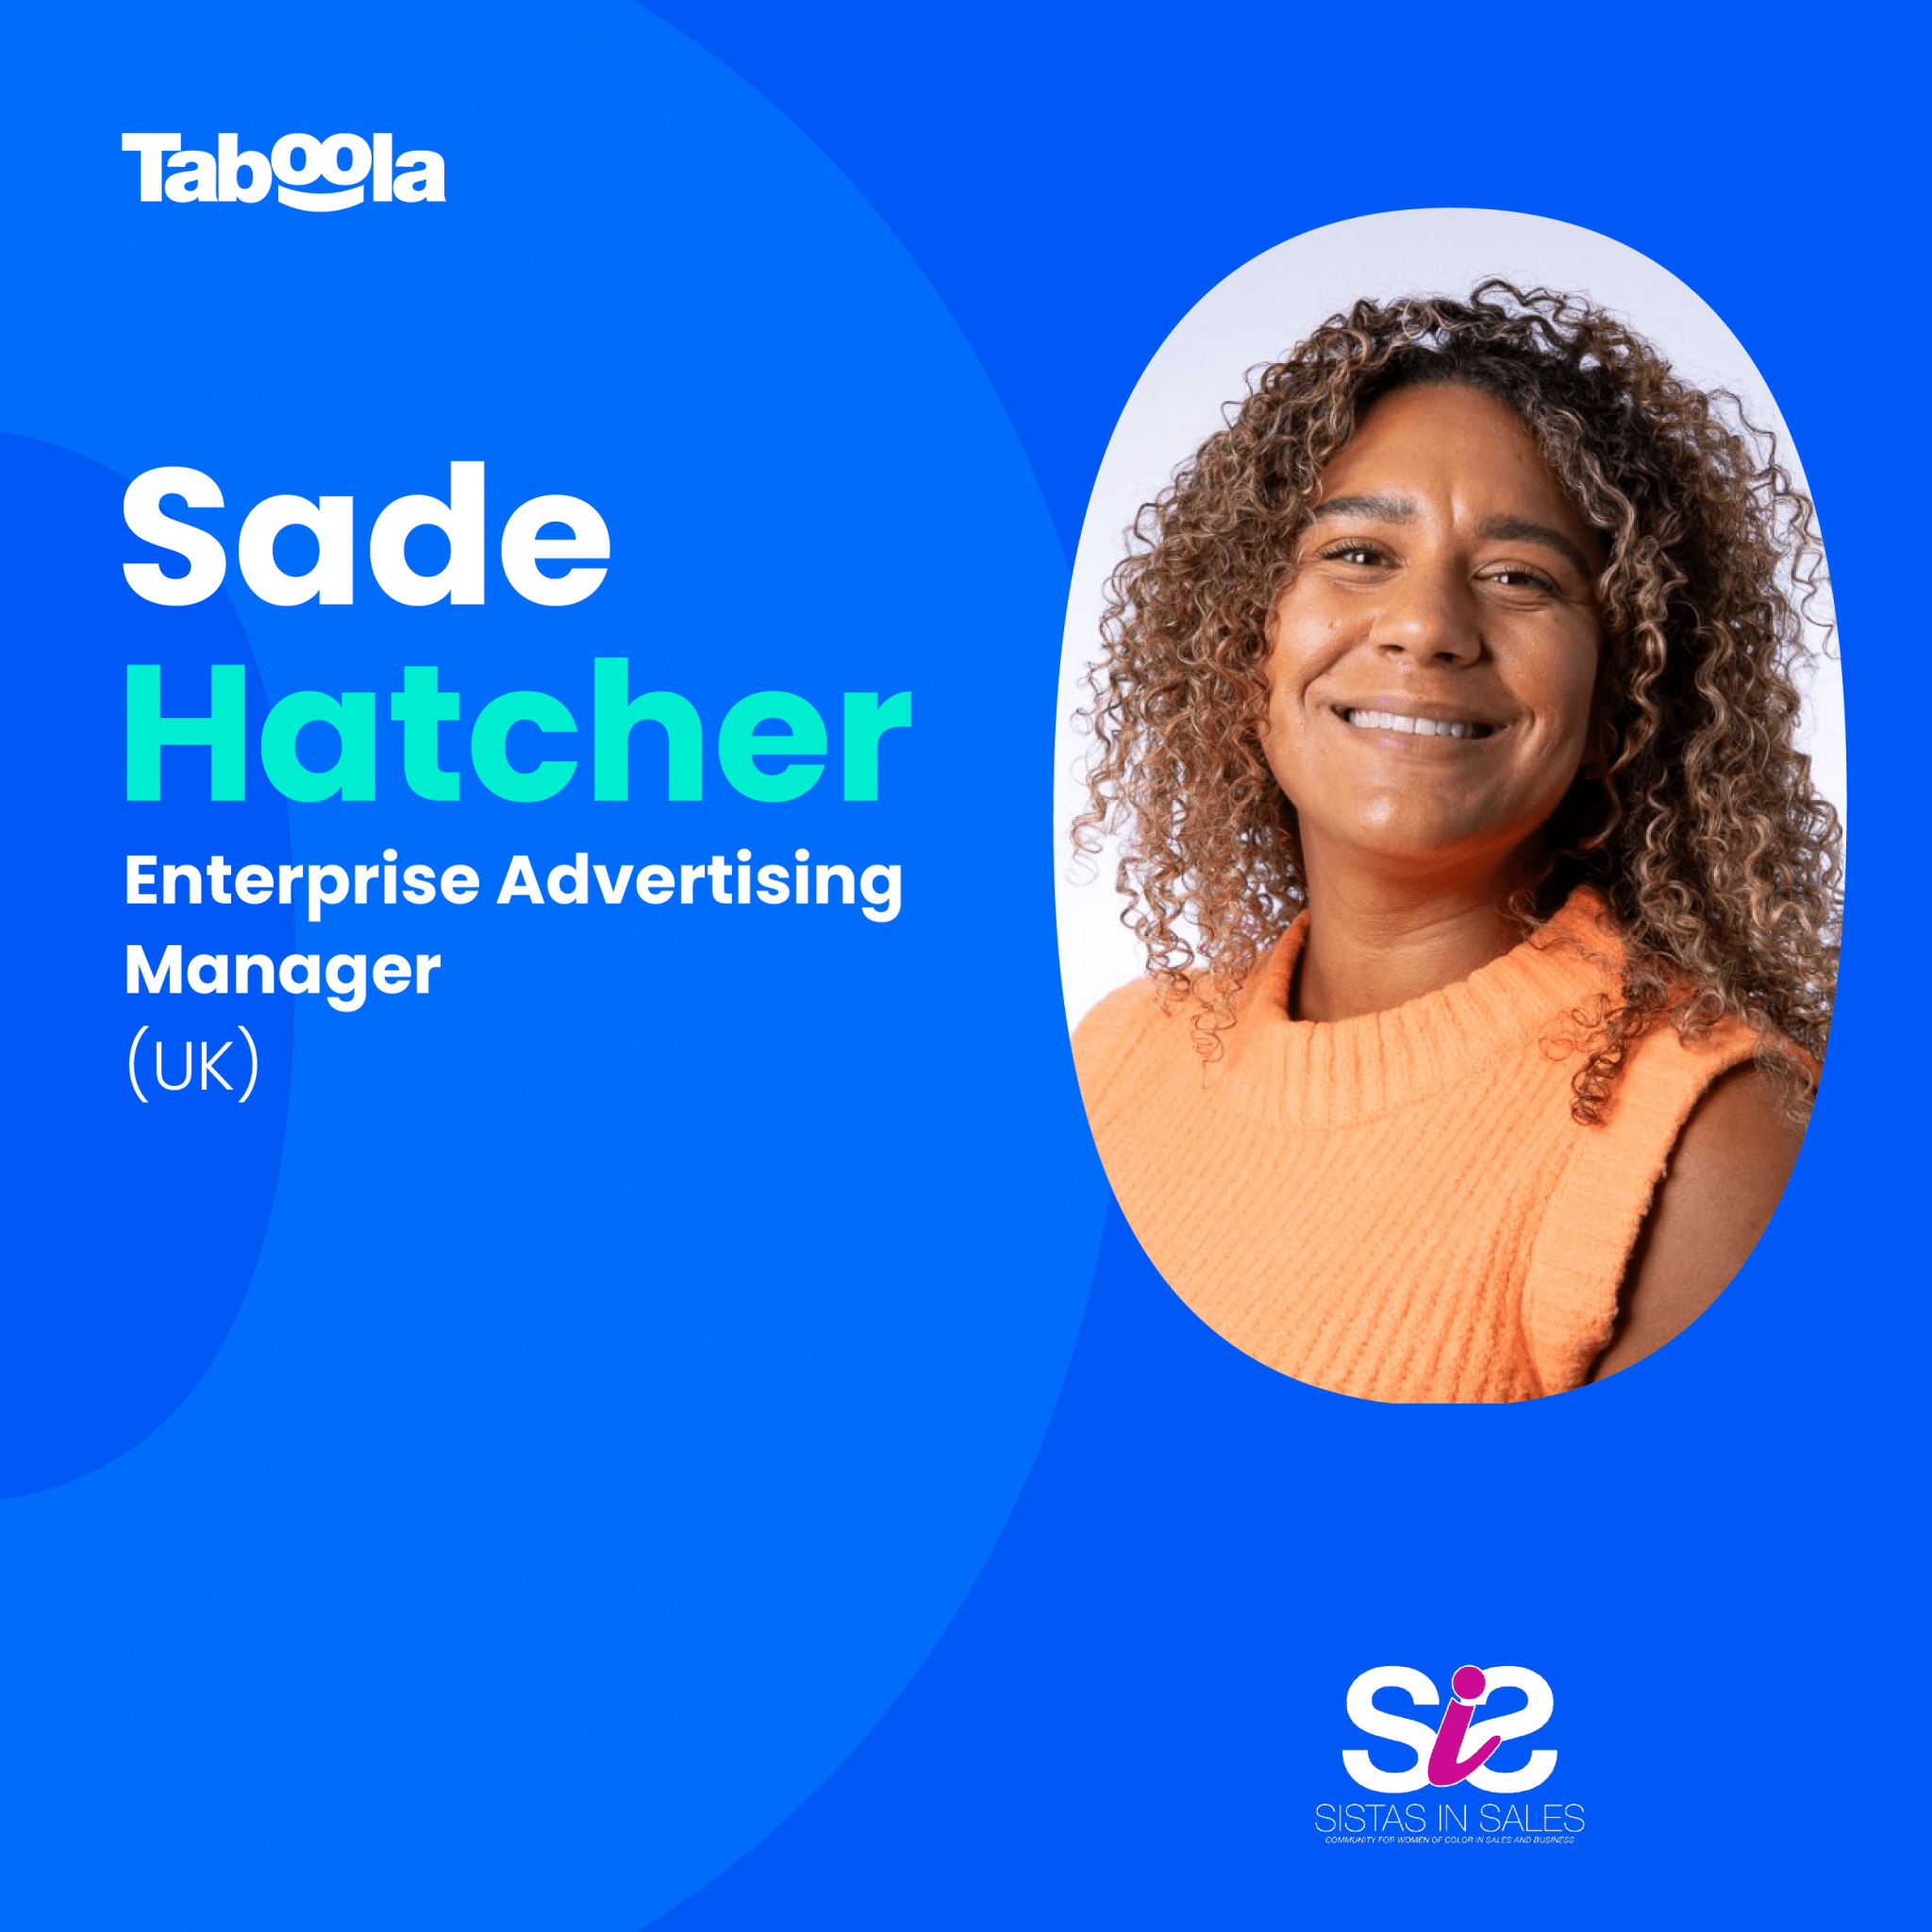 A Sistas in Sales Feature: How Sade Hatcher Infuses Creativity & Authenticity Into Her Sales Approach